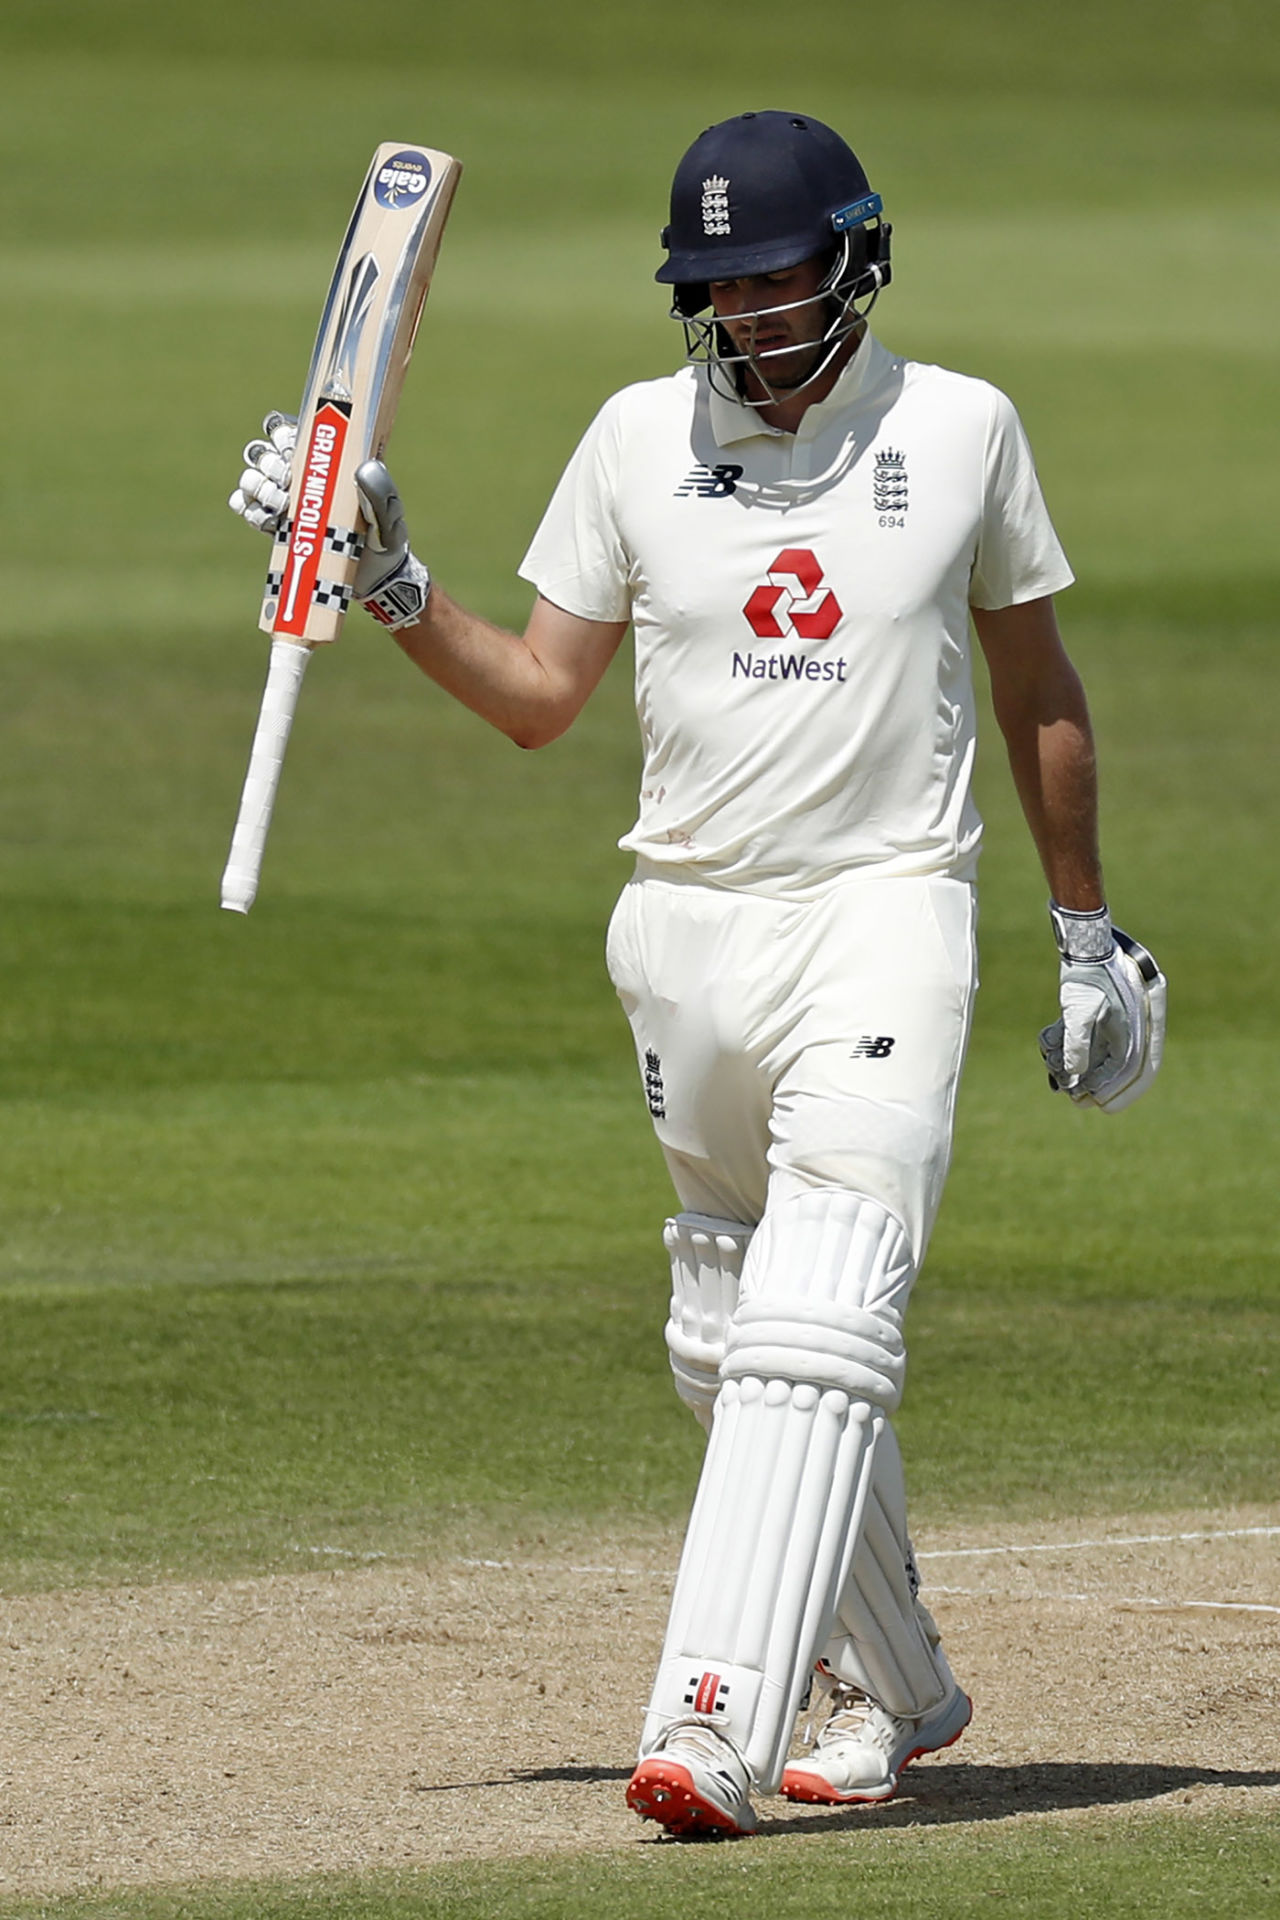 Dom Sibley celebrates after reaching fifty, England v West Indies, 1st Test, 4th day, Southampton, July 11, 2020